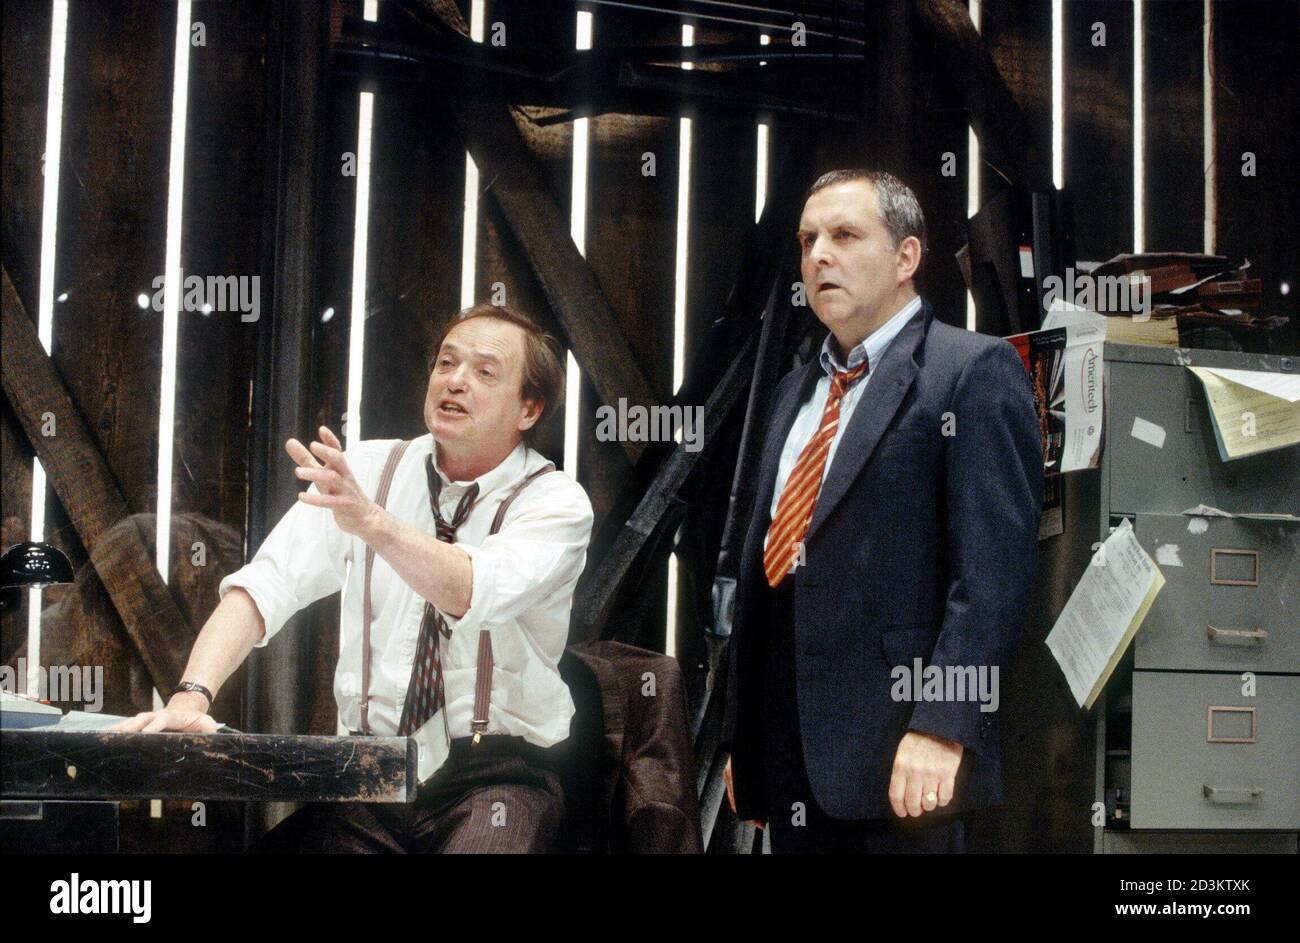 l-r: James Bolam (Shelly Levene), Anthony O'Donnell (Dave Moss) in GLENGARRY GLEN ROSS by David Mamet at the Donmar Warehouse, London WC2  22/06/1994  design: Johann Engels  director: Sam Mendes Stock Photo